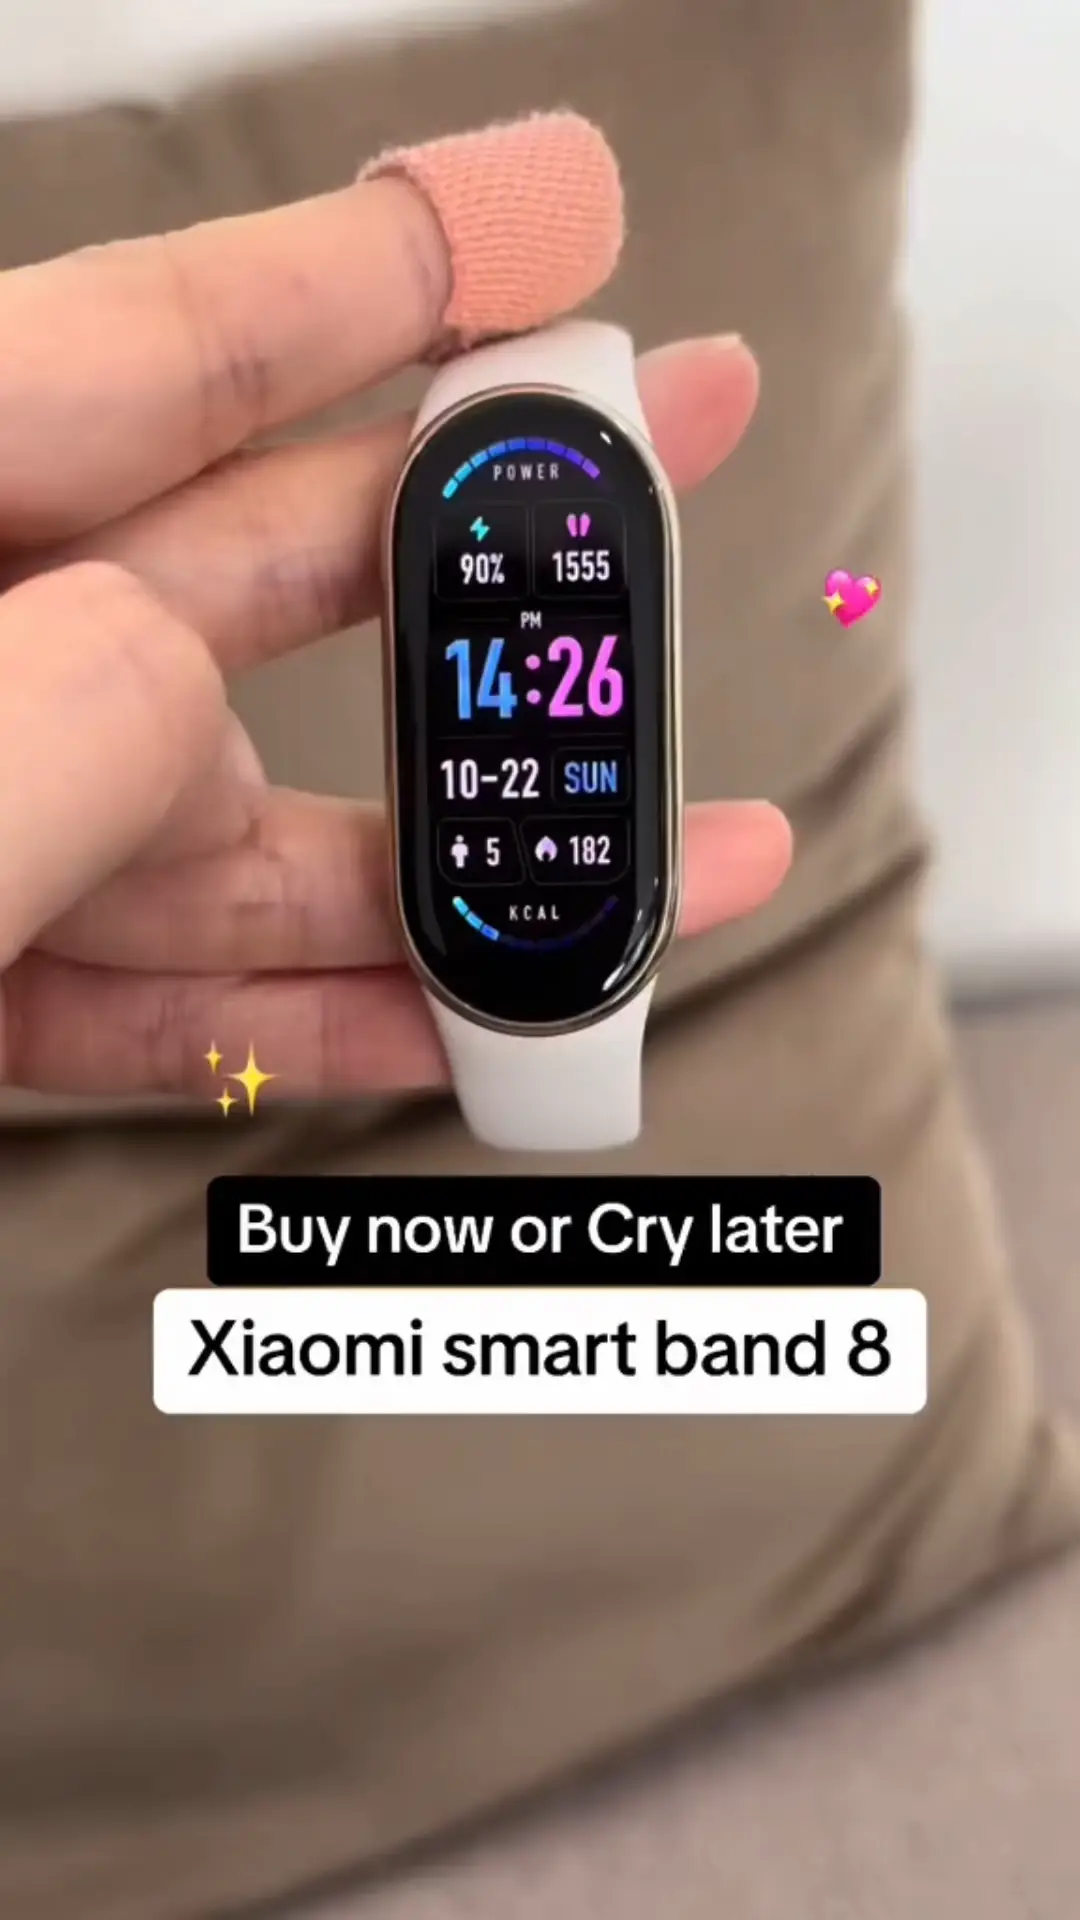 Xiaomi band 8 should buy? Go to see.✨, Video published by Lady Pardie